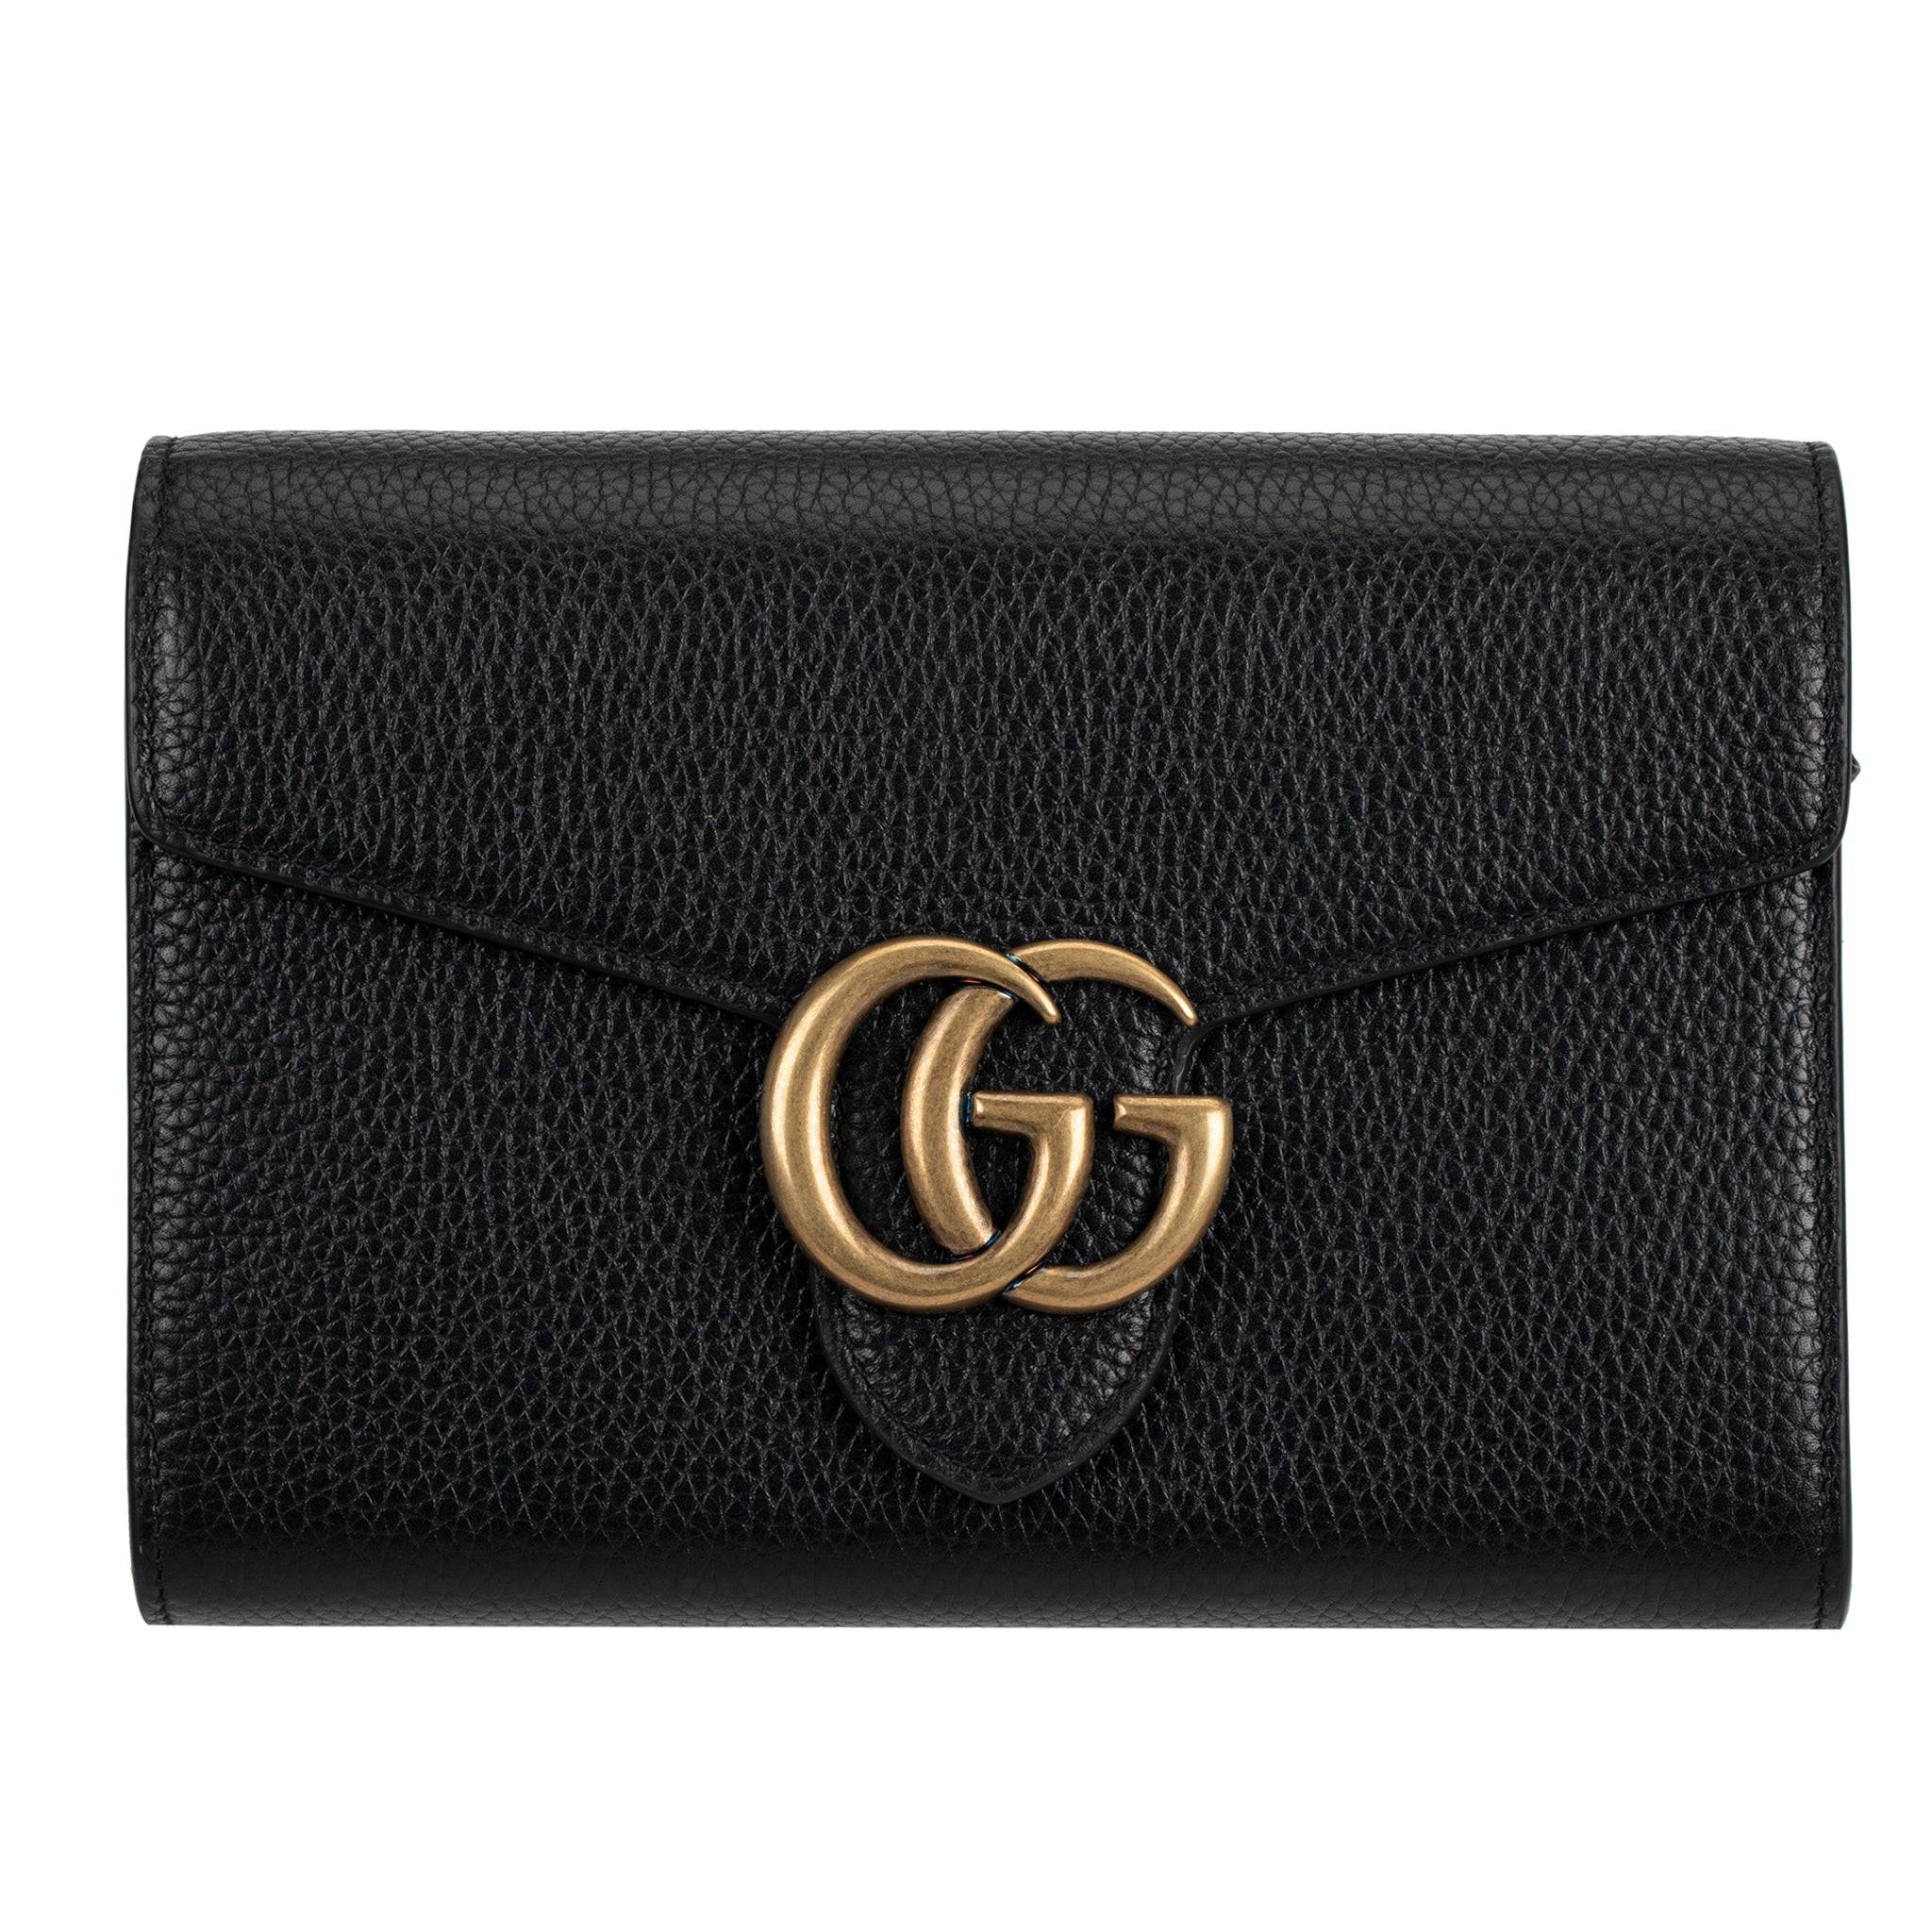 GUCCI MARMONT WALLET ON CHAIN BLACK PEBBLED LEATHER AGED GOLD HARDWARE - On Repeat